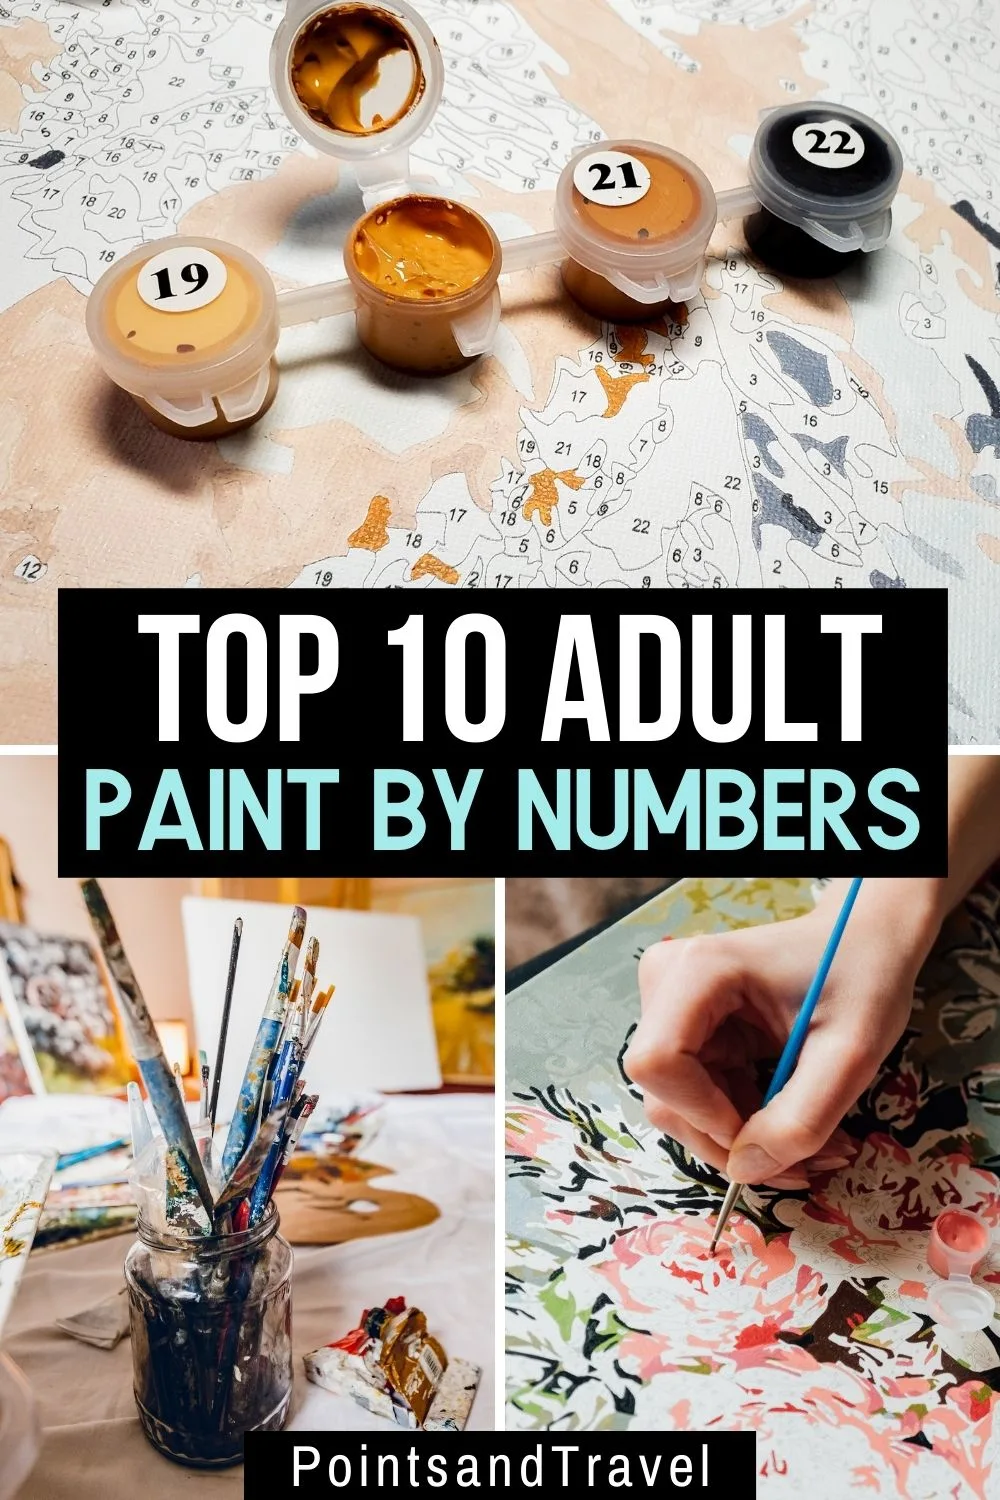 9 Best Paint By Numbers for Adults